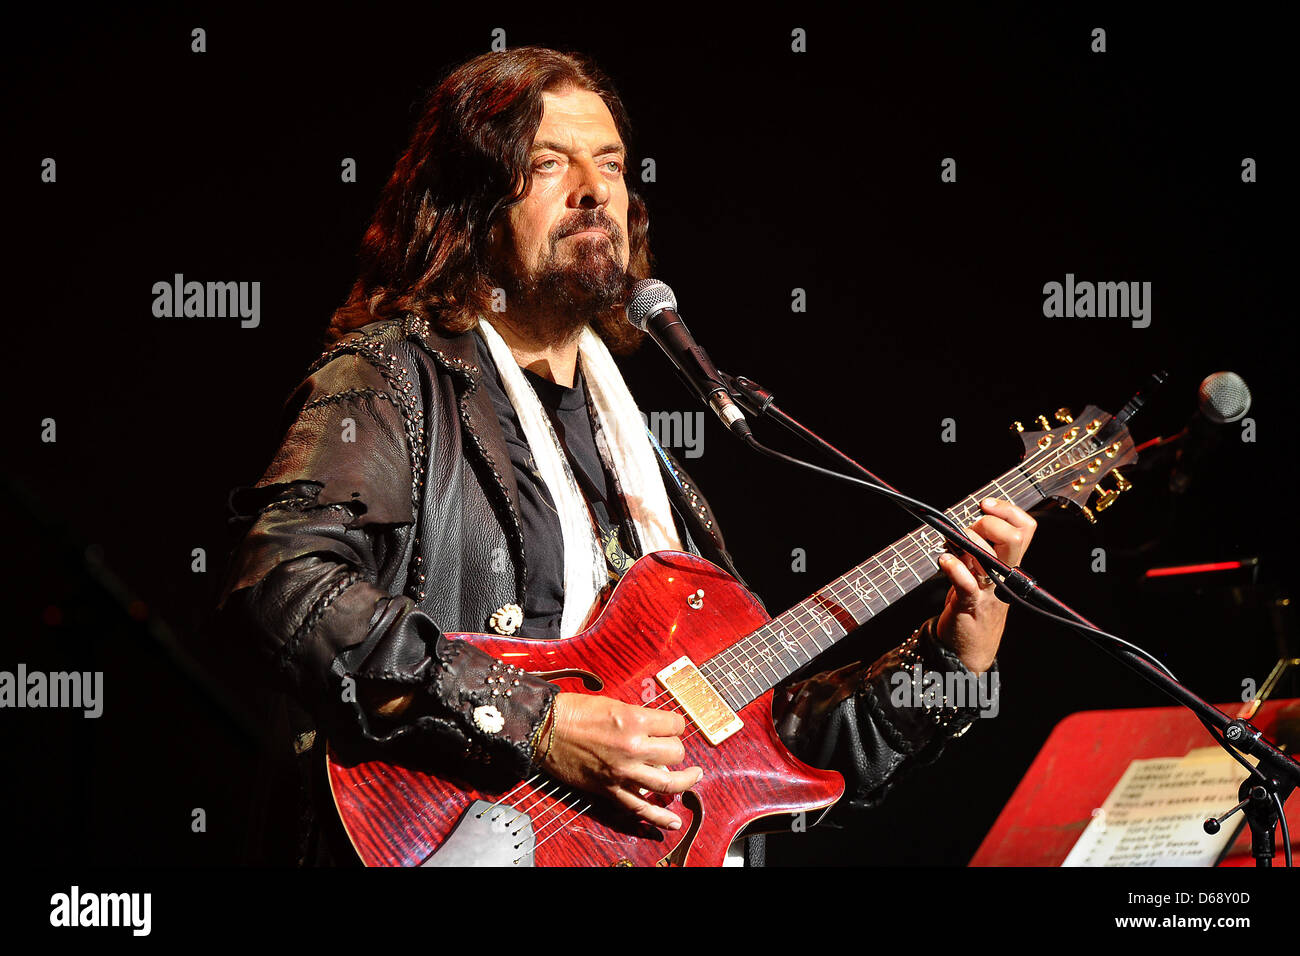 British musician and producer Alan Parsons plays his guitar during a The Alan Parsons Live Project concert at Colosseum Theater in Essen, Germany, 20 July 2012. Photo: Revierfoto Stock Photo